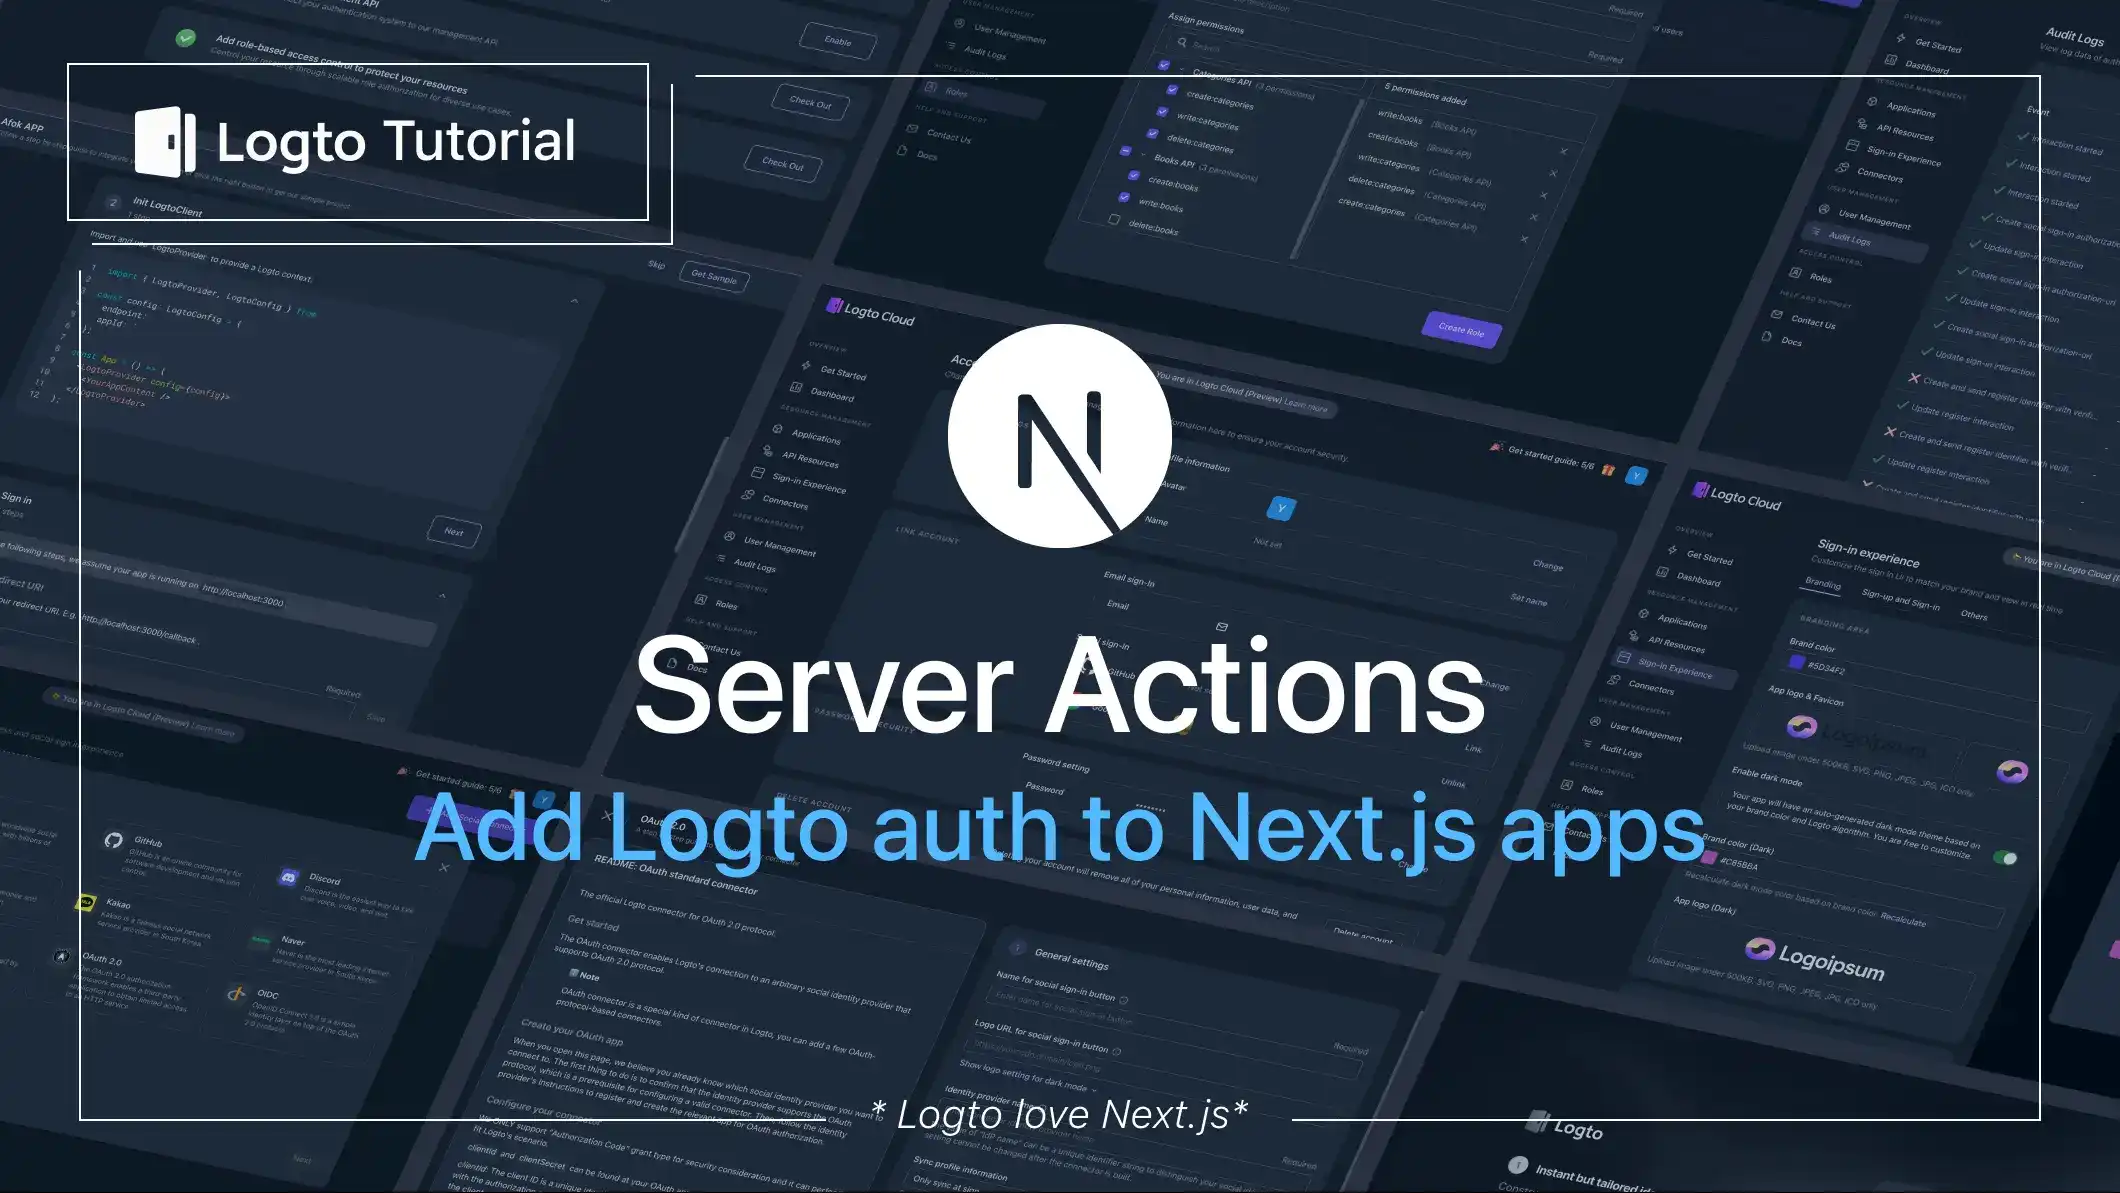 Add Logto auth to your Next.js application using Server Actions